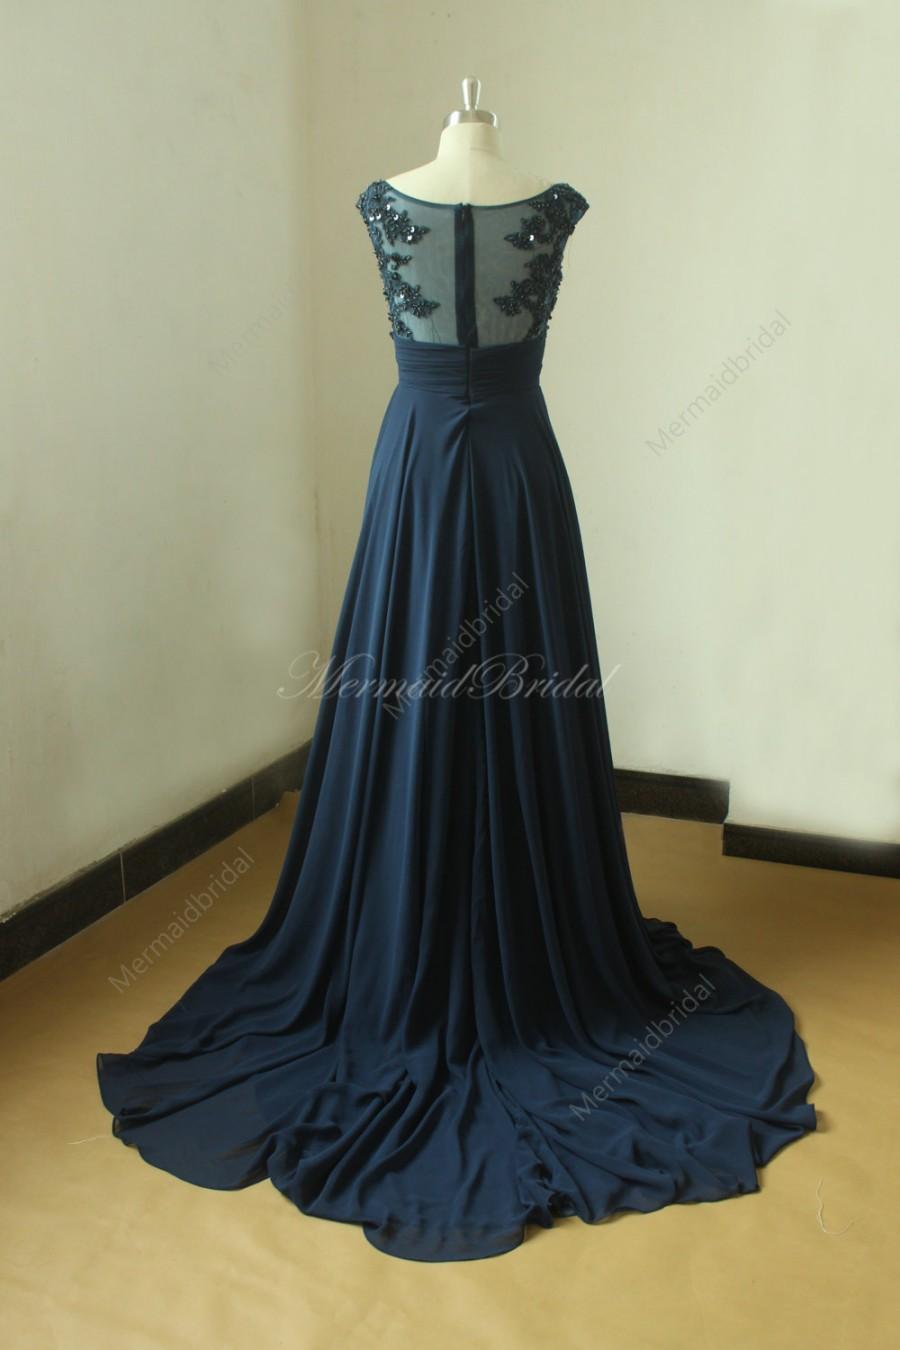 Свадьба - Backless Navy blue A line chiffon lace wedding dress with illusion neckline